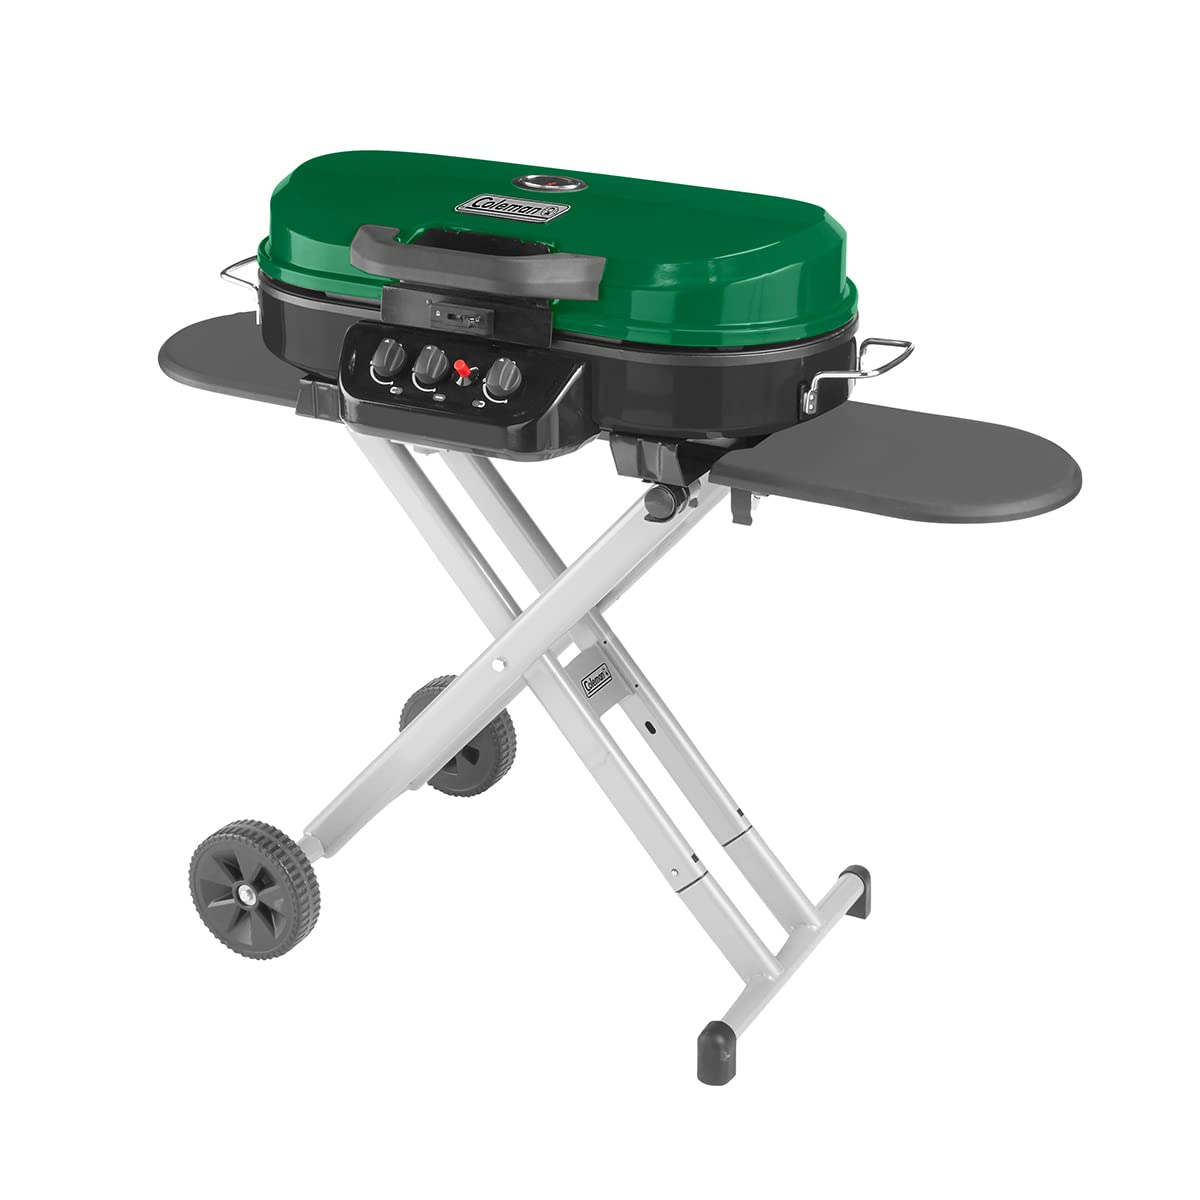 20,000-BTU Coleman Roadtrip 285 Portable Stand-Up Propane Grill w/ Wheels, Collapsable Legs, & 2 Side Tables (Green, Red) $199 + Free Shipping